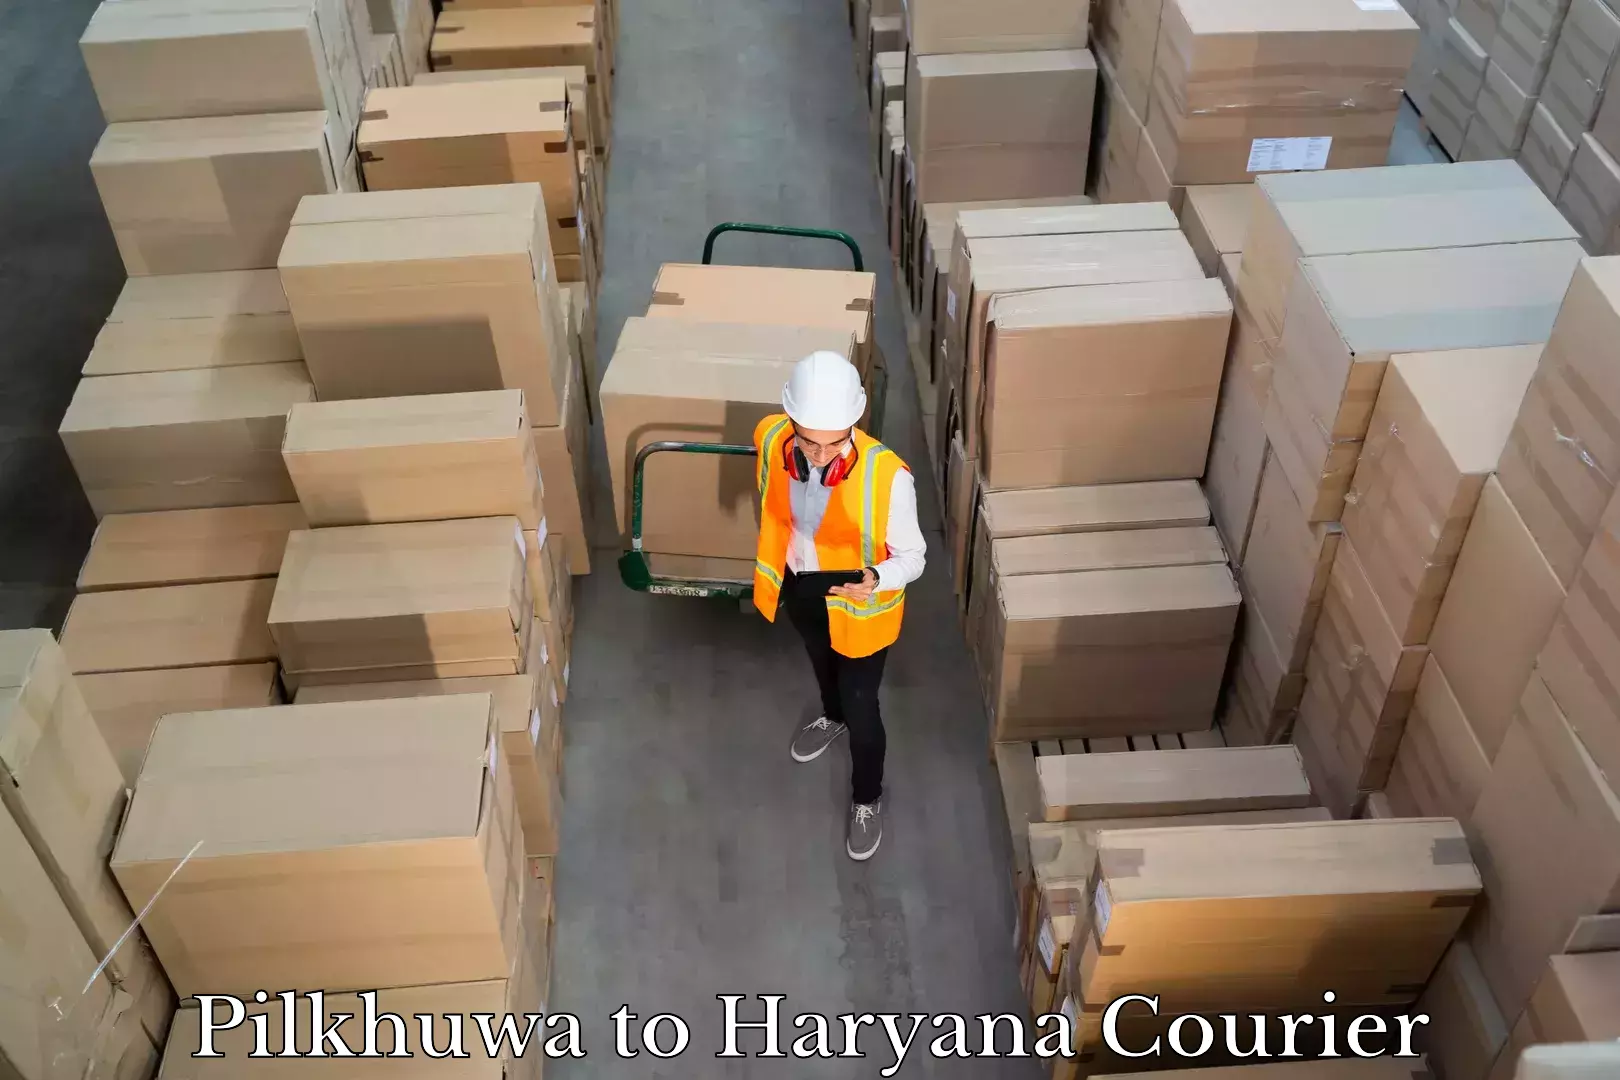 Baggage transport services in Pilkhuwa to Haryana